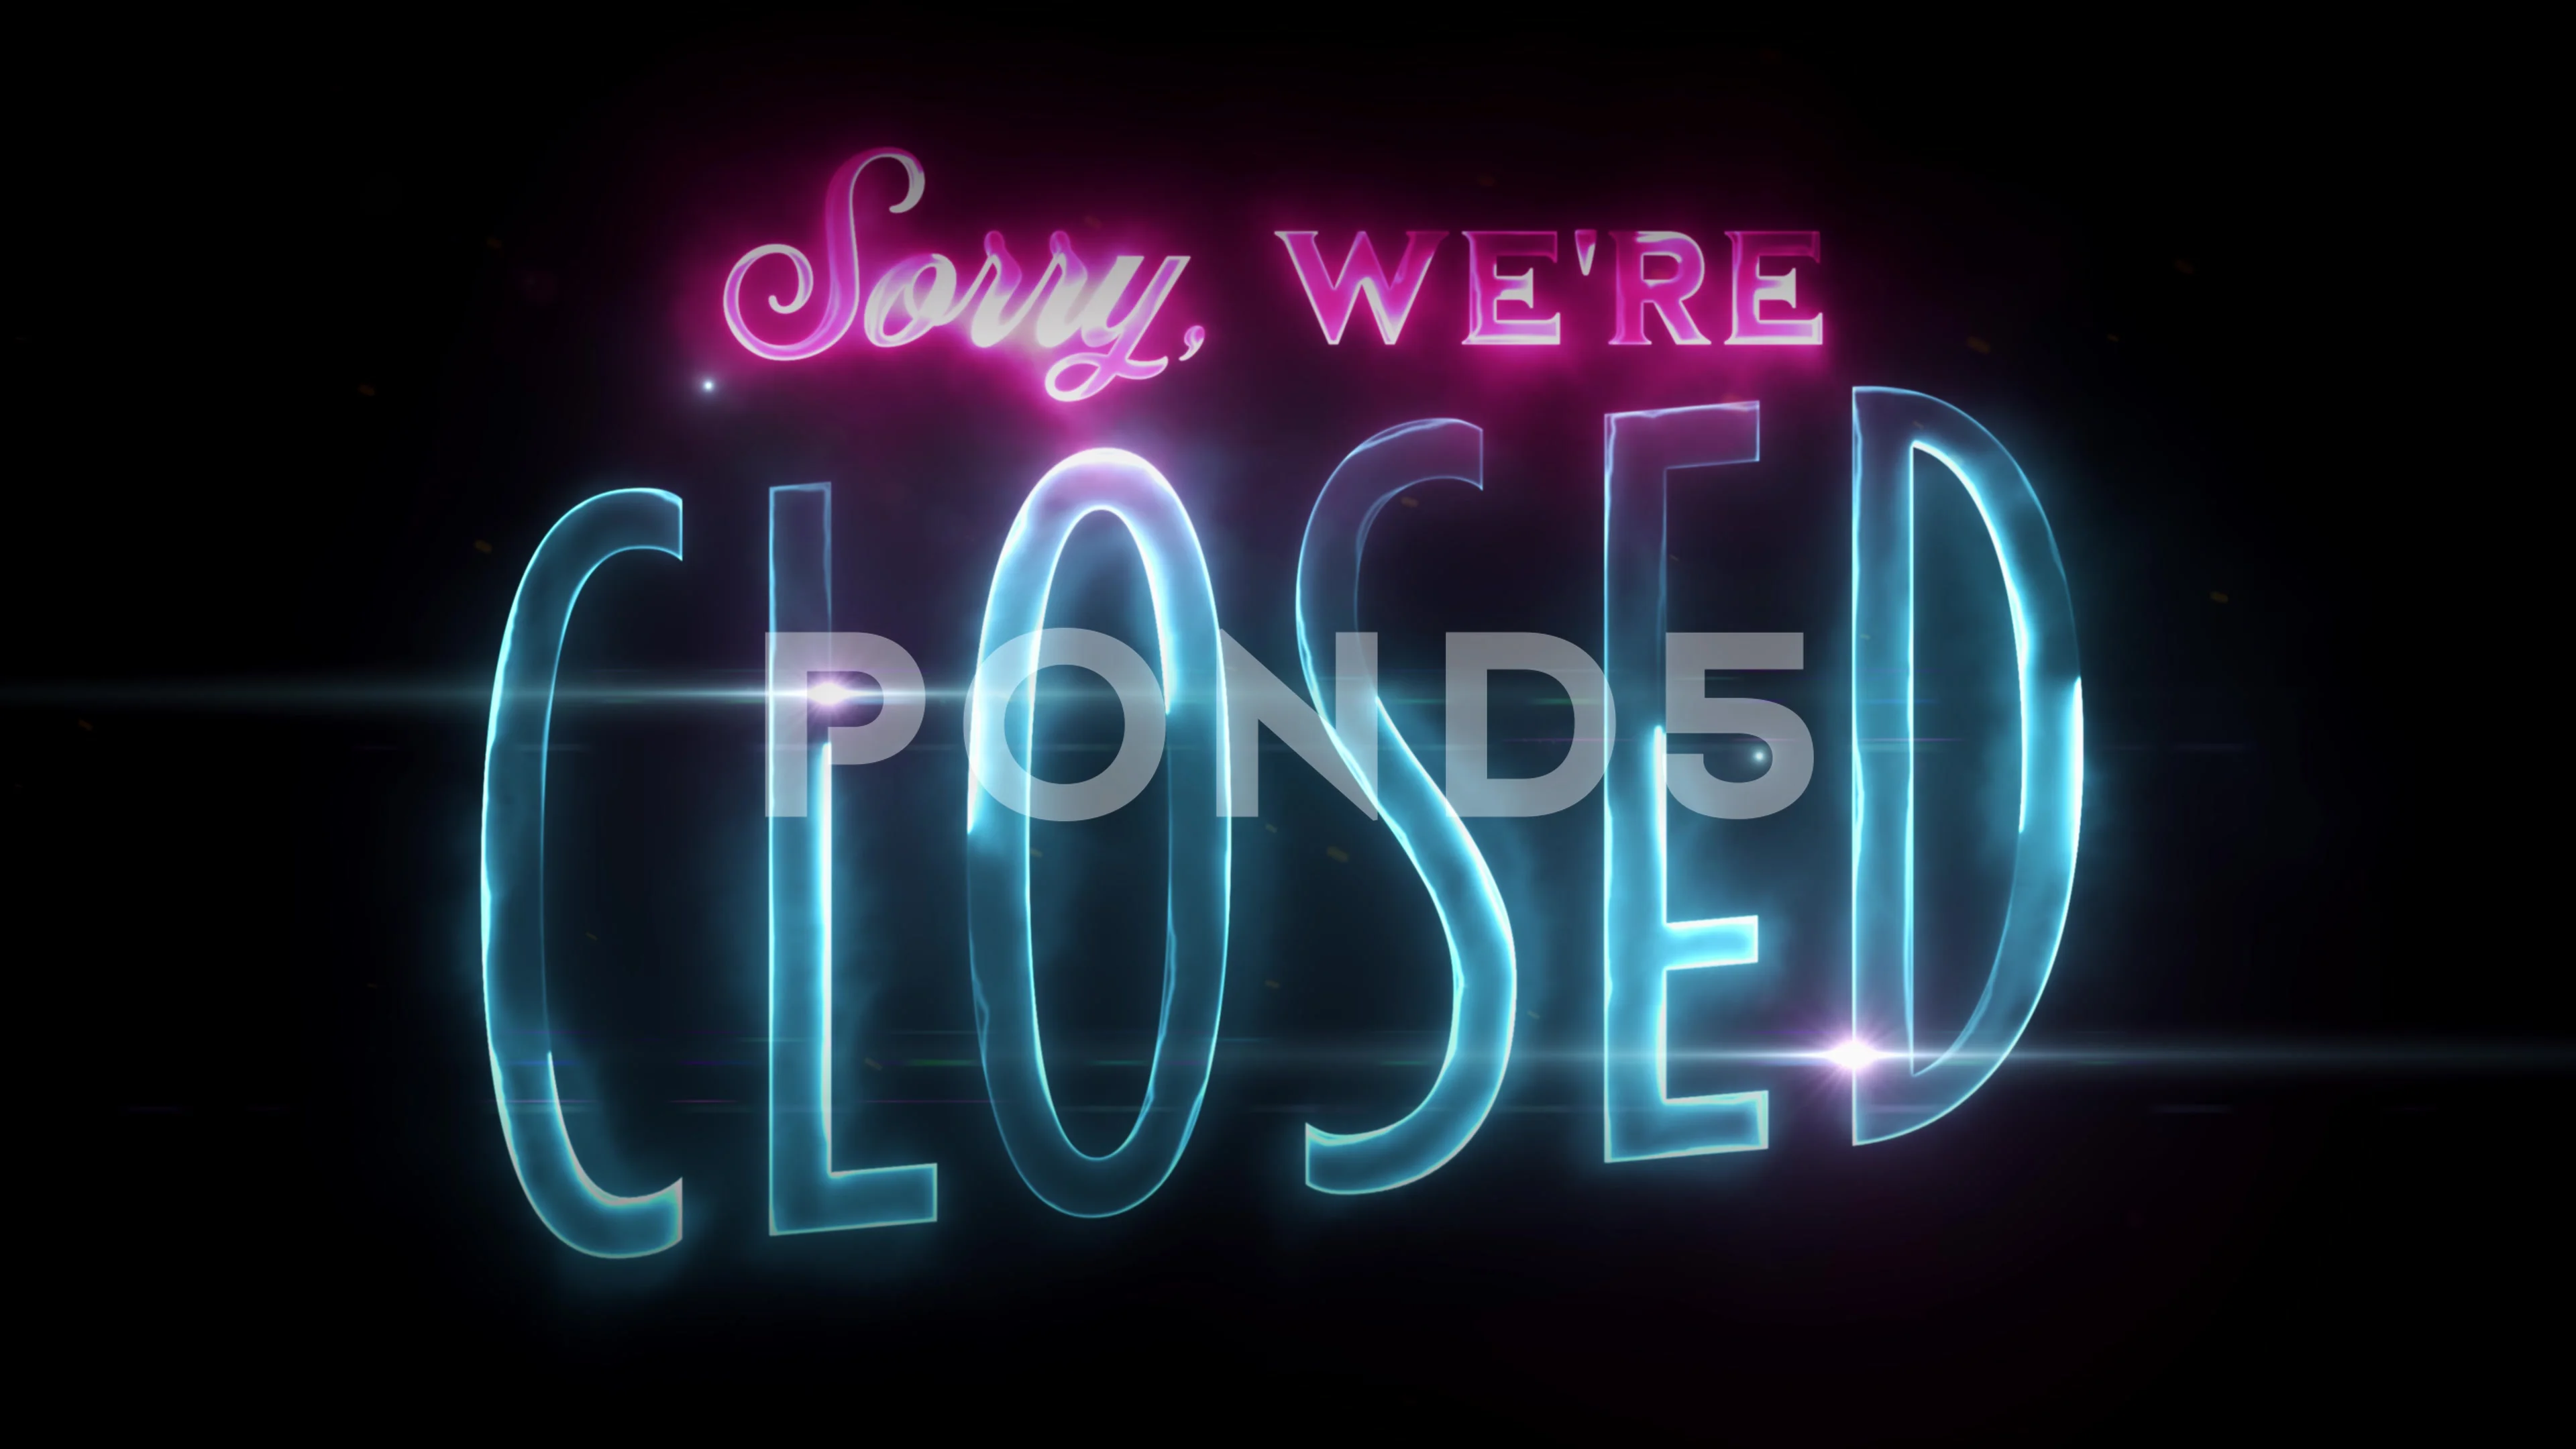 Sorry we are closed template